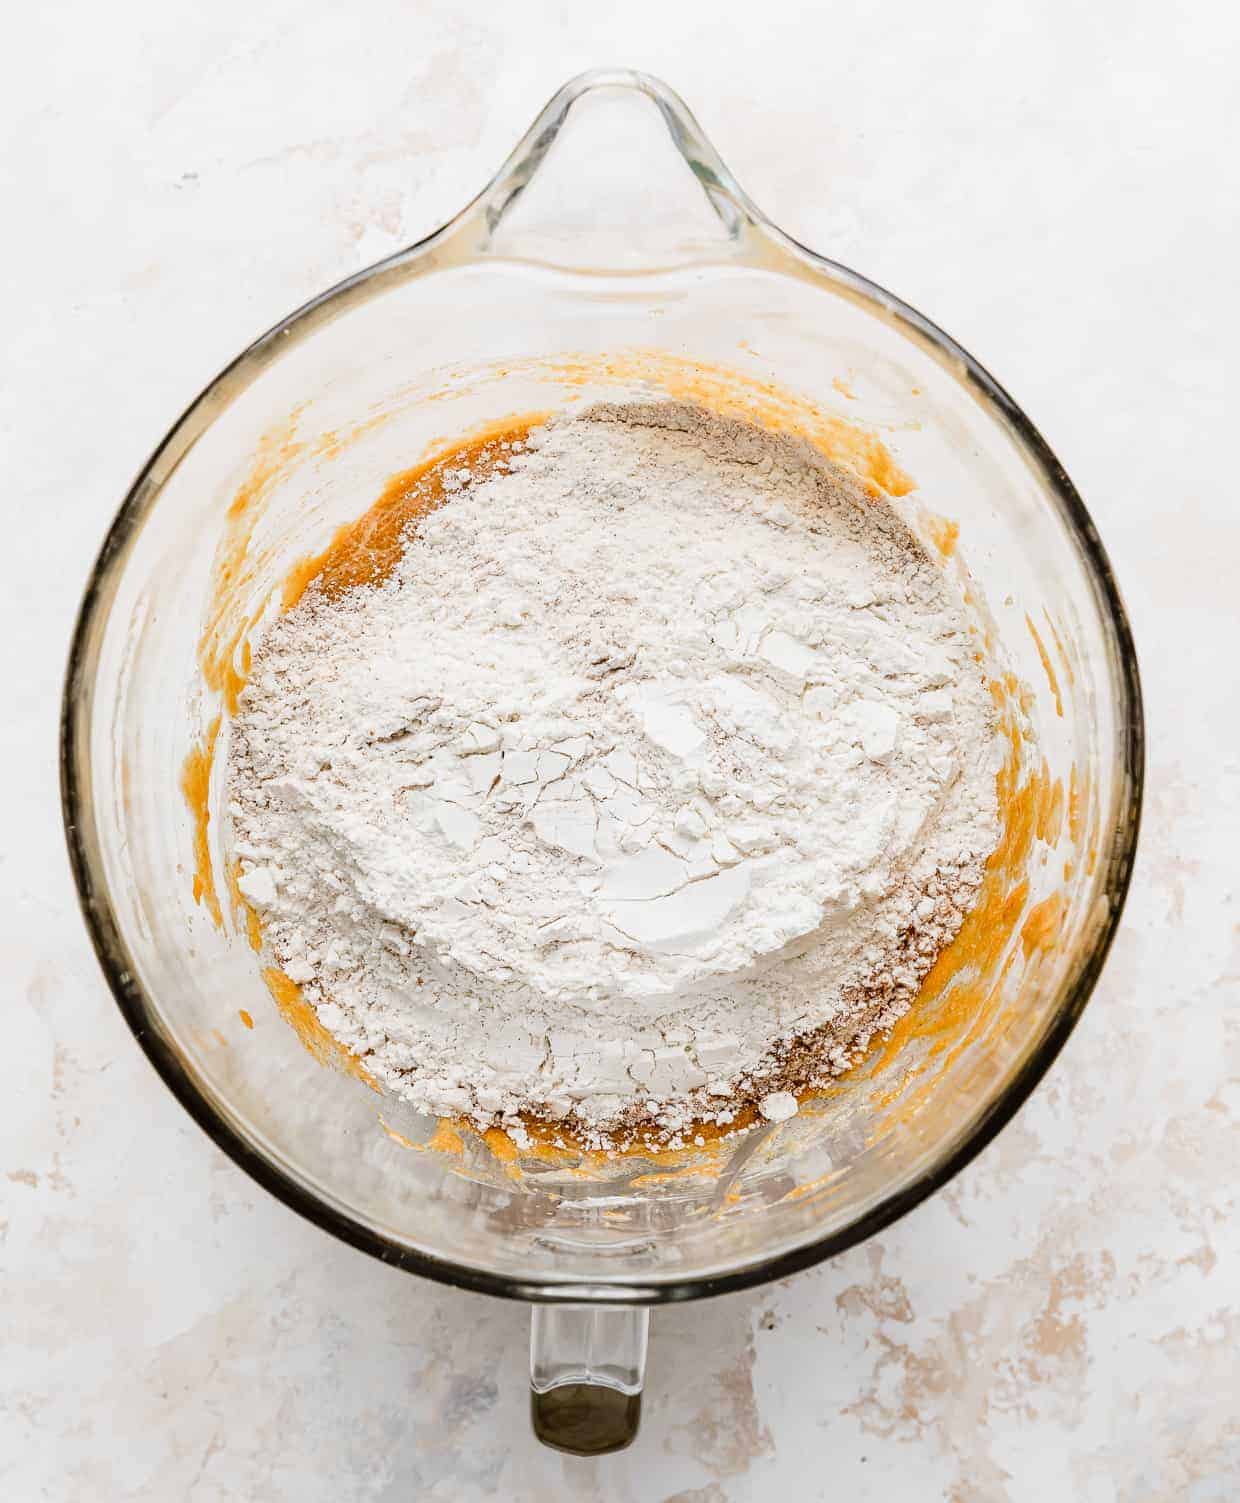 Dry ingredients a top an orange batter in a glass bowl.